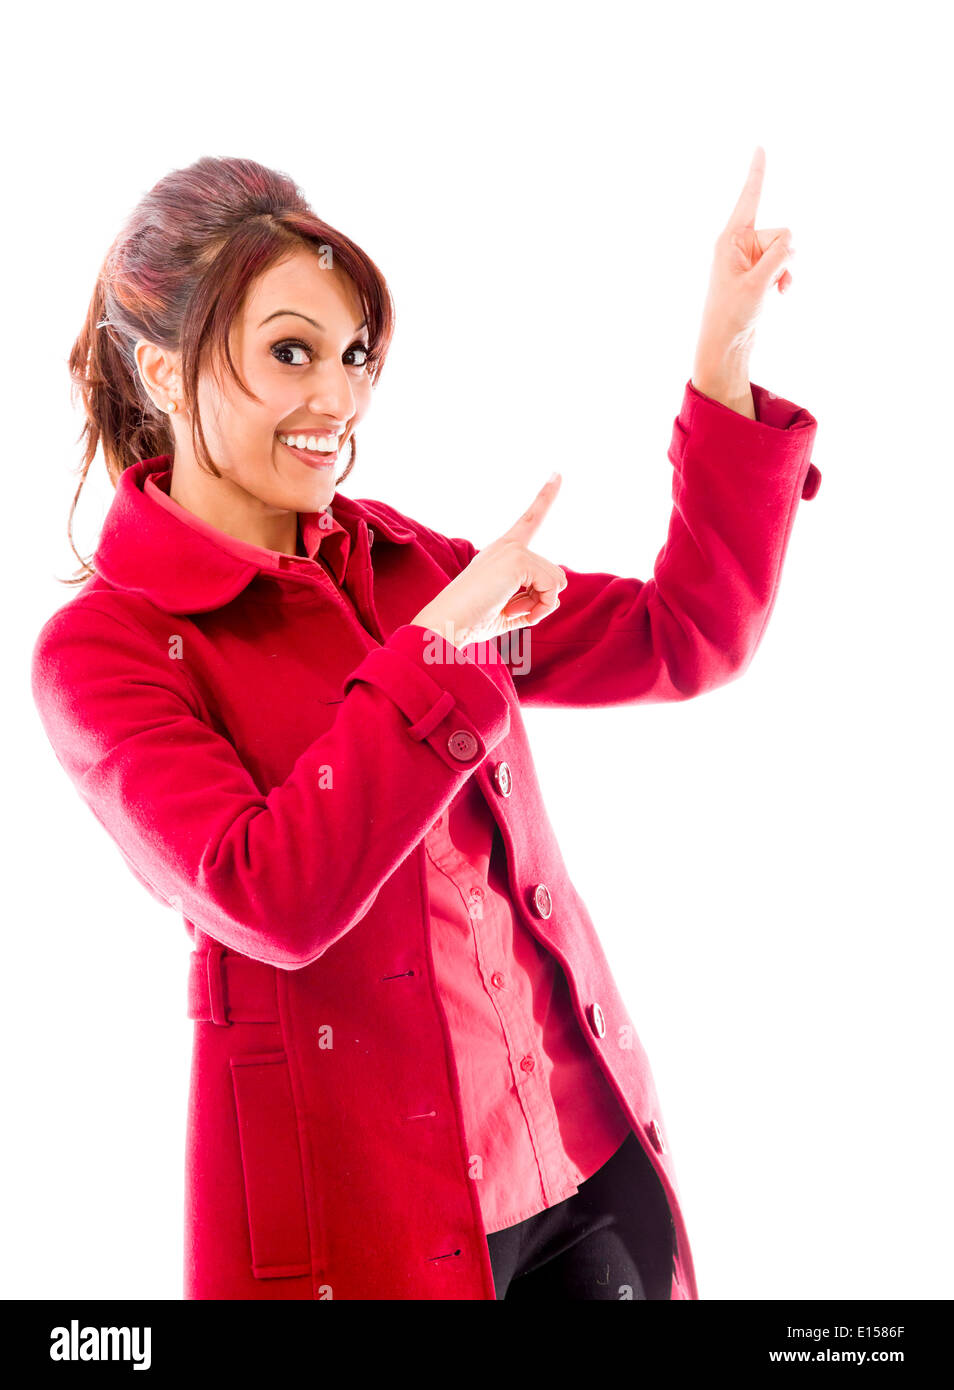 Indian young woman pointing upward and smiling Stock Photo